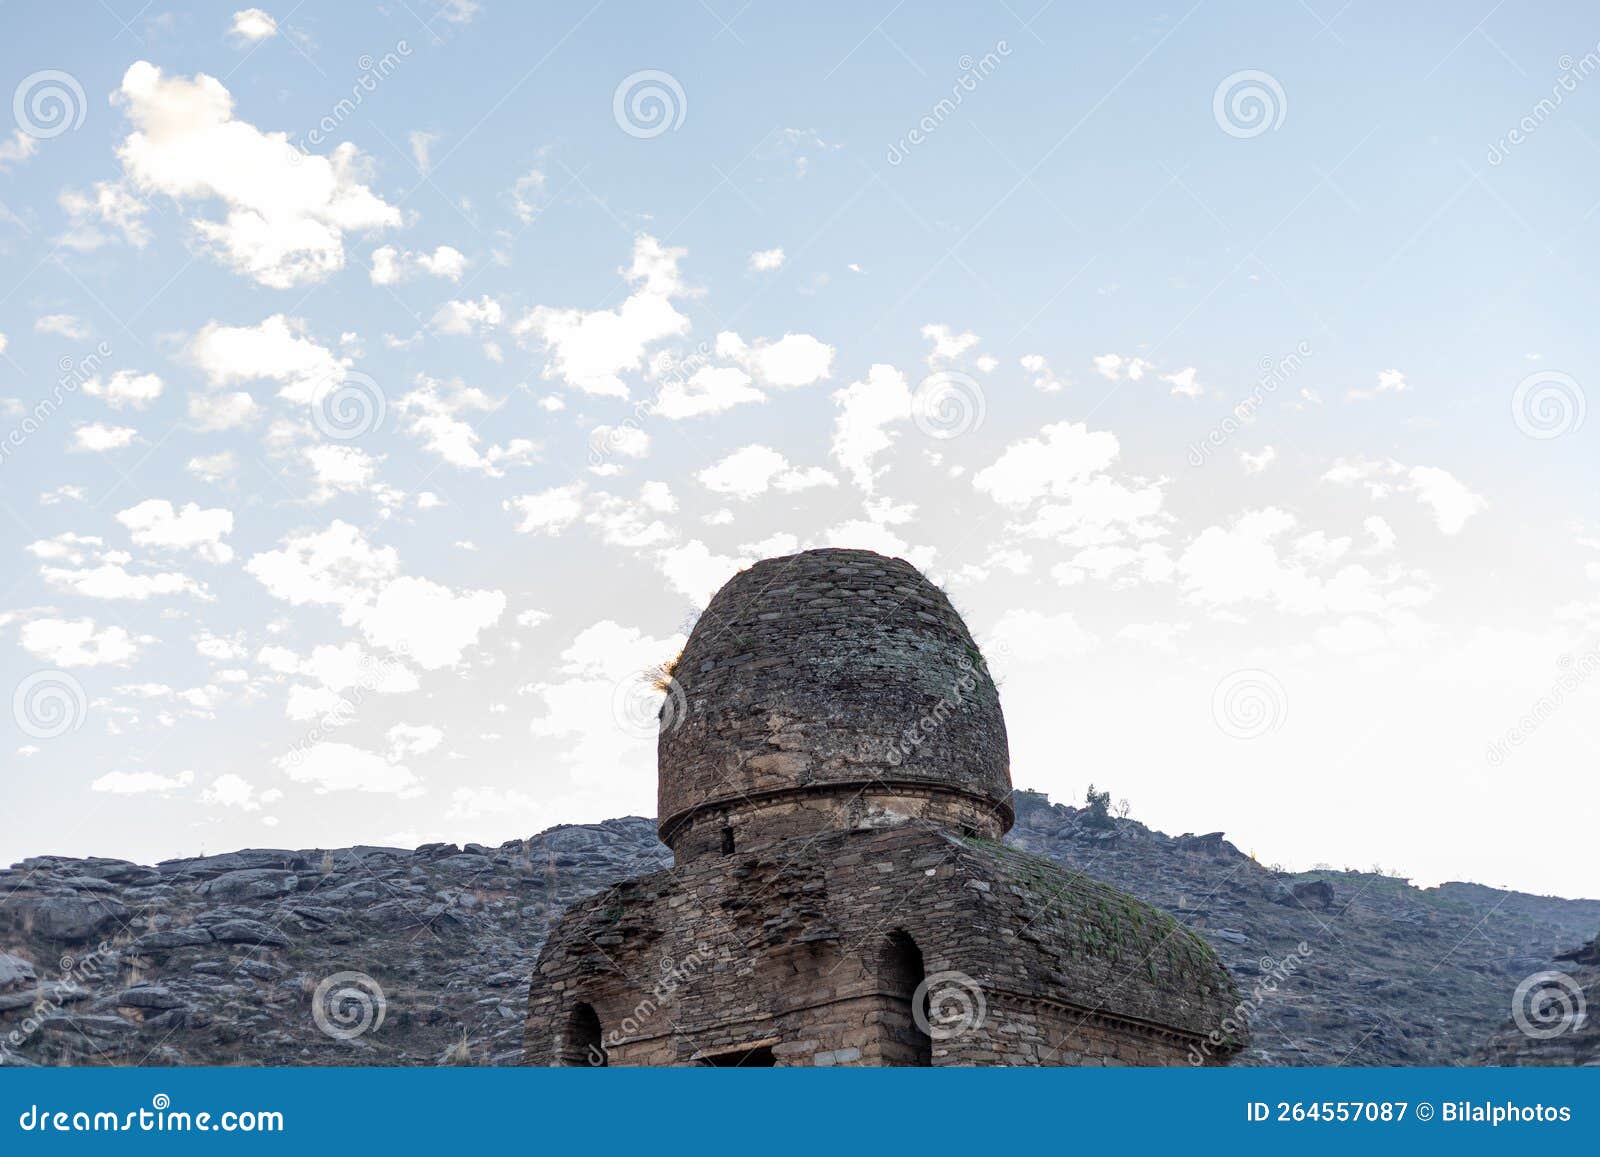 the remains of ancient bhudha civilization double dome stupa in the balo kaley built in the 2nd century